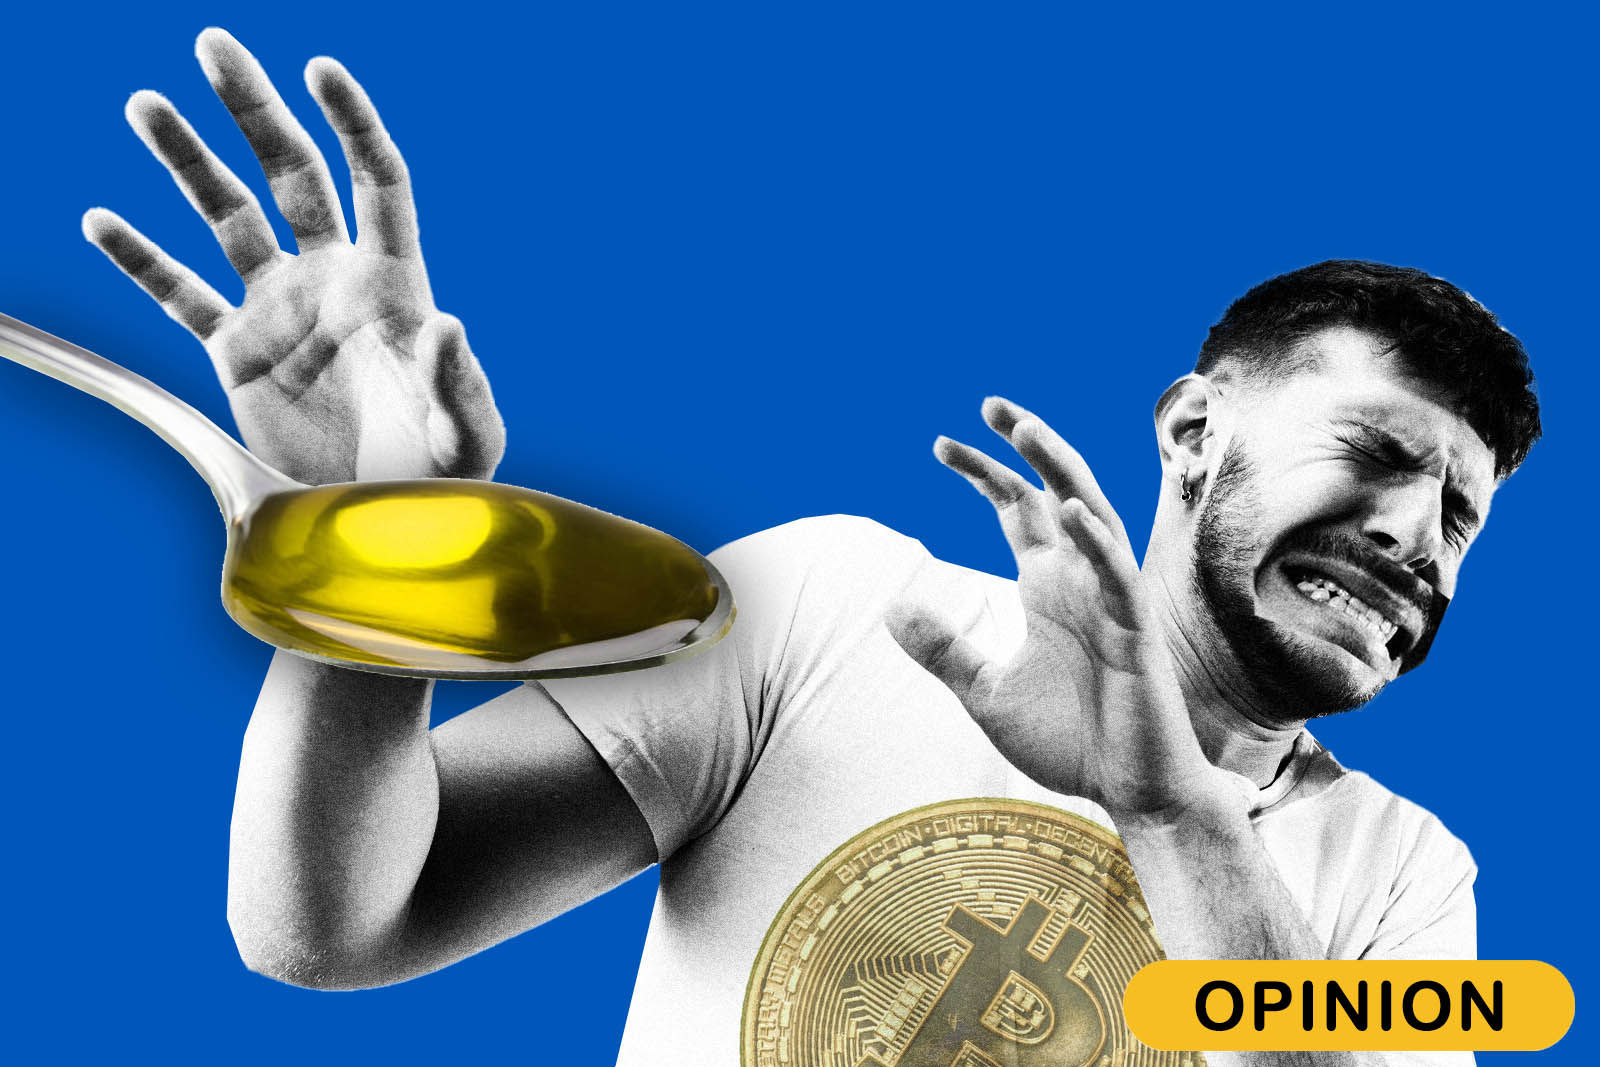 Opinion - Why Bitcoin Doesn’t Seem To Fight Well Against Inflation